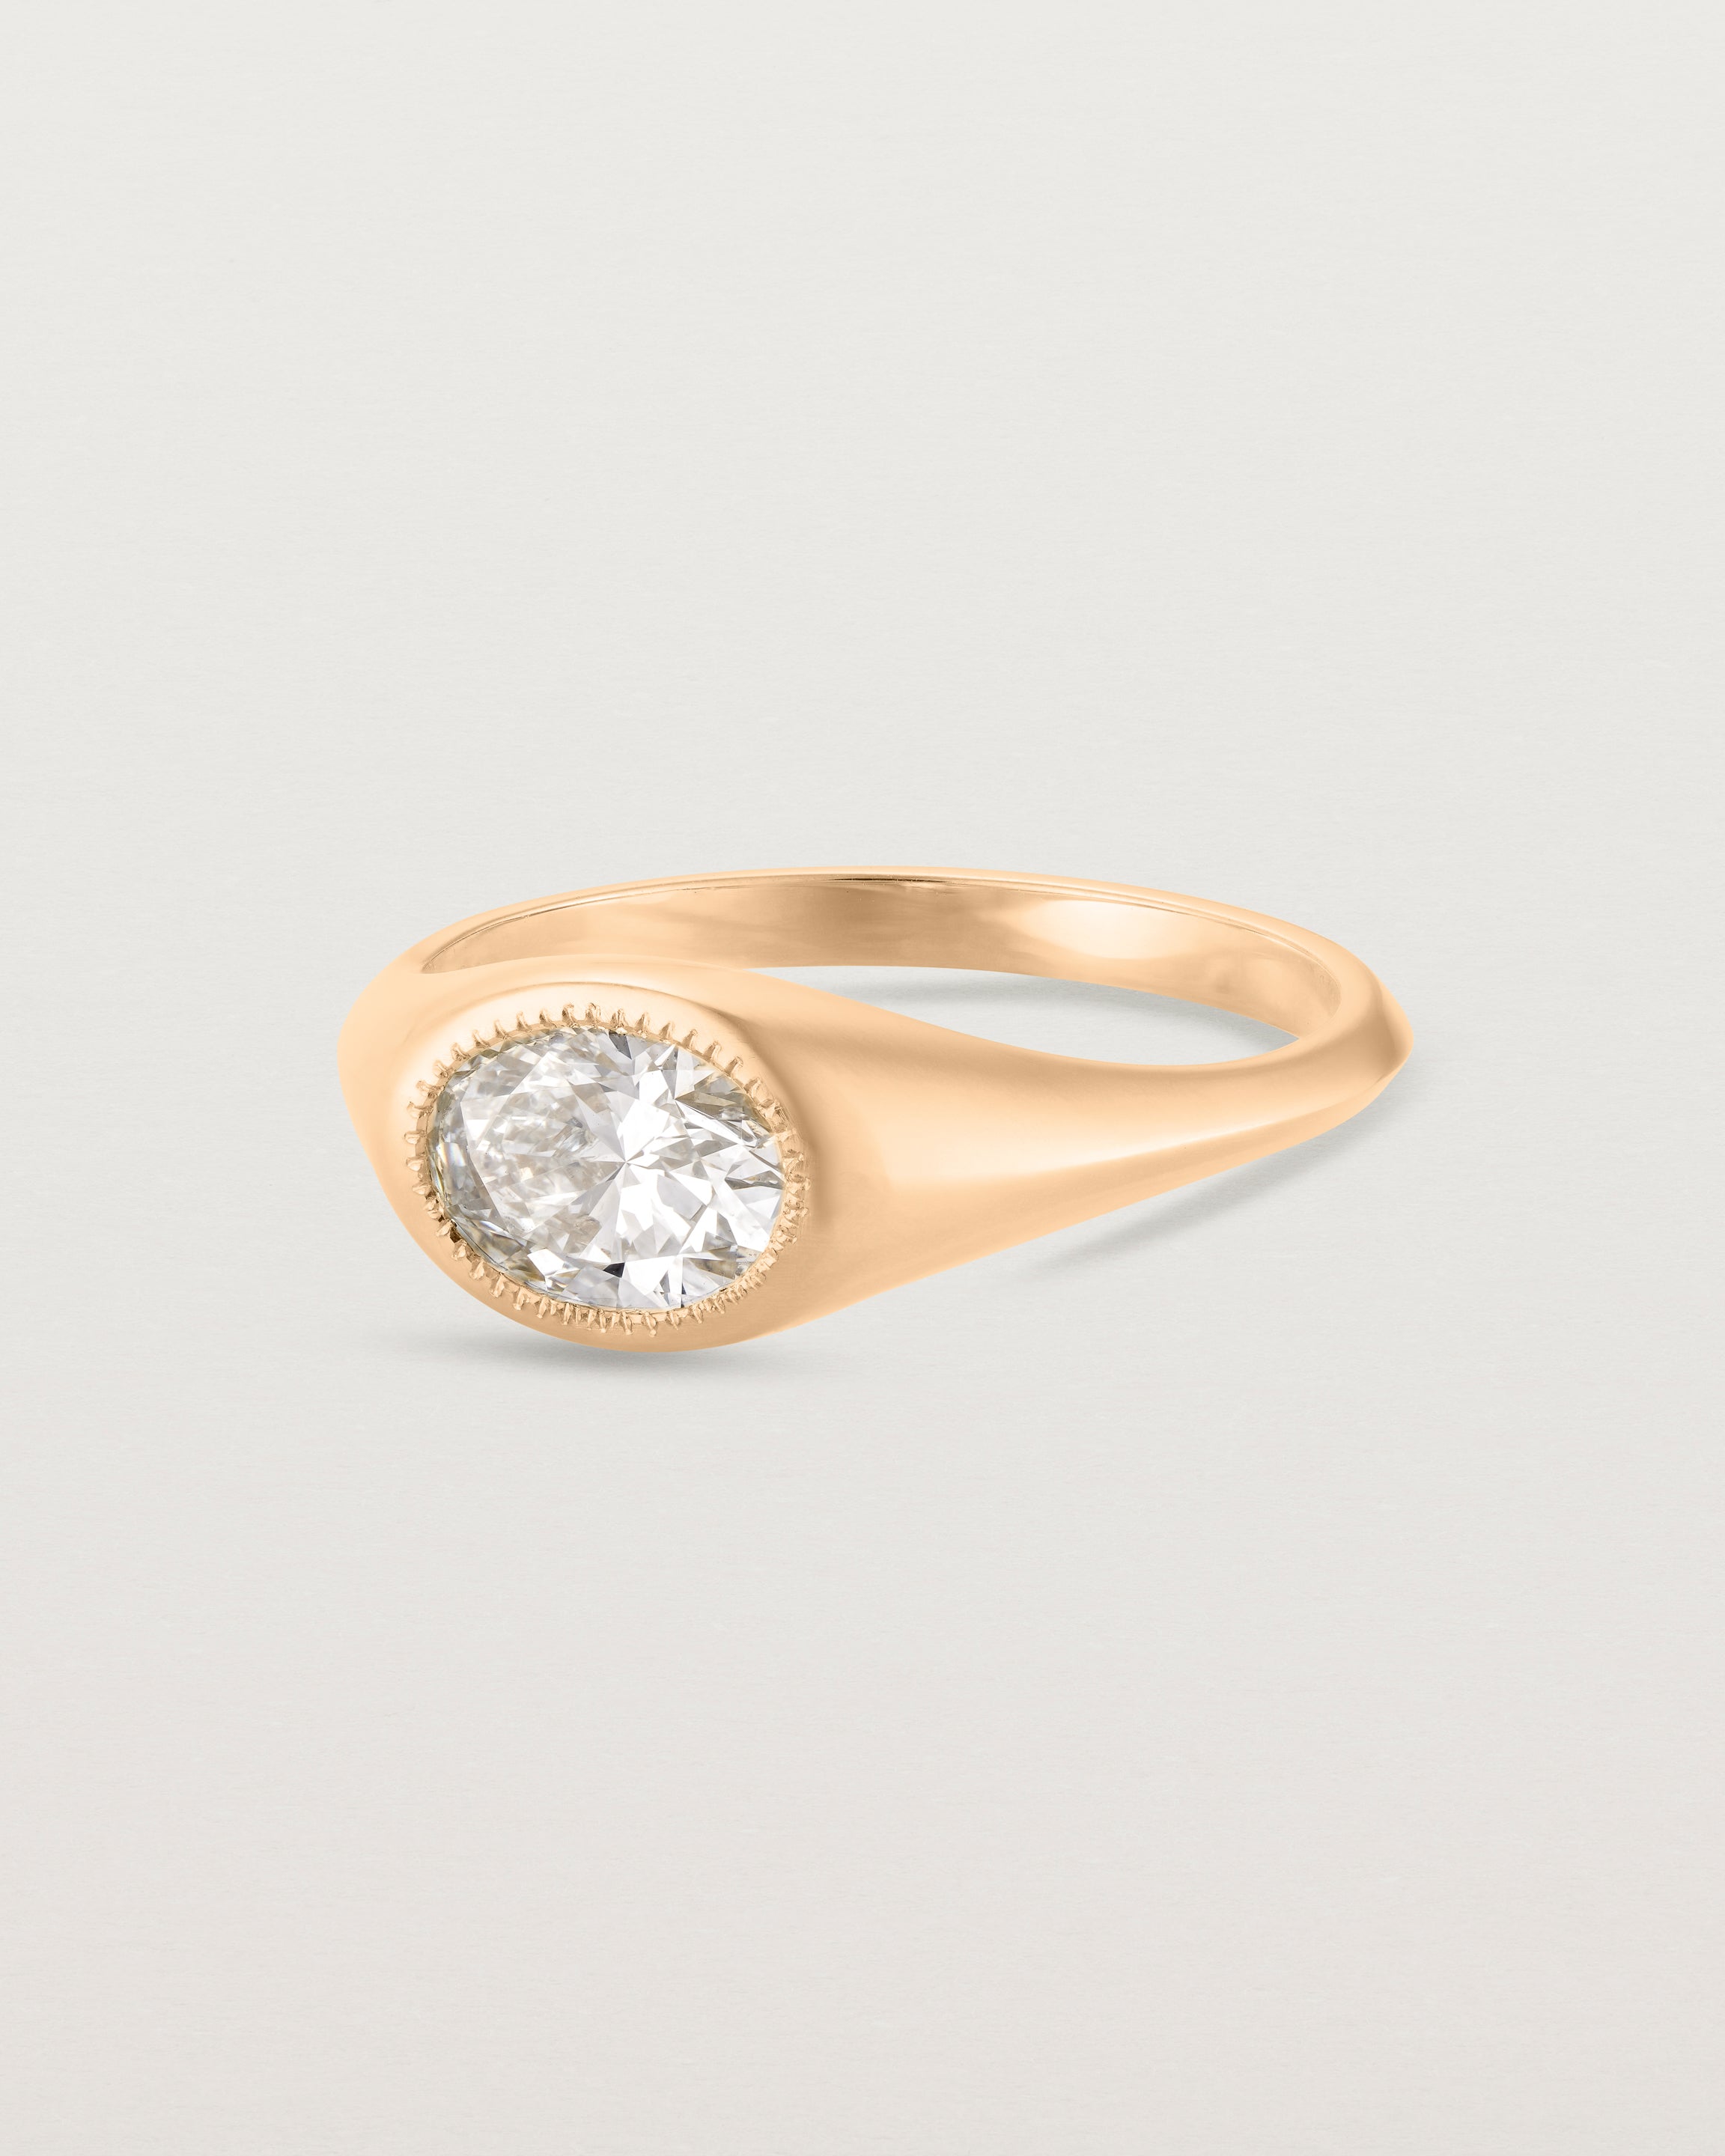 Angle view of the Átlas Oval Signet | Laboratory Grown Diamond in rose gold, with a polished finish.